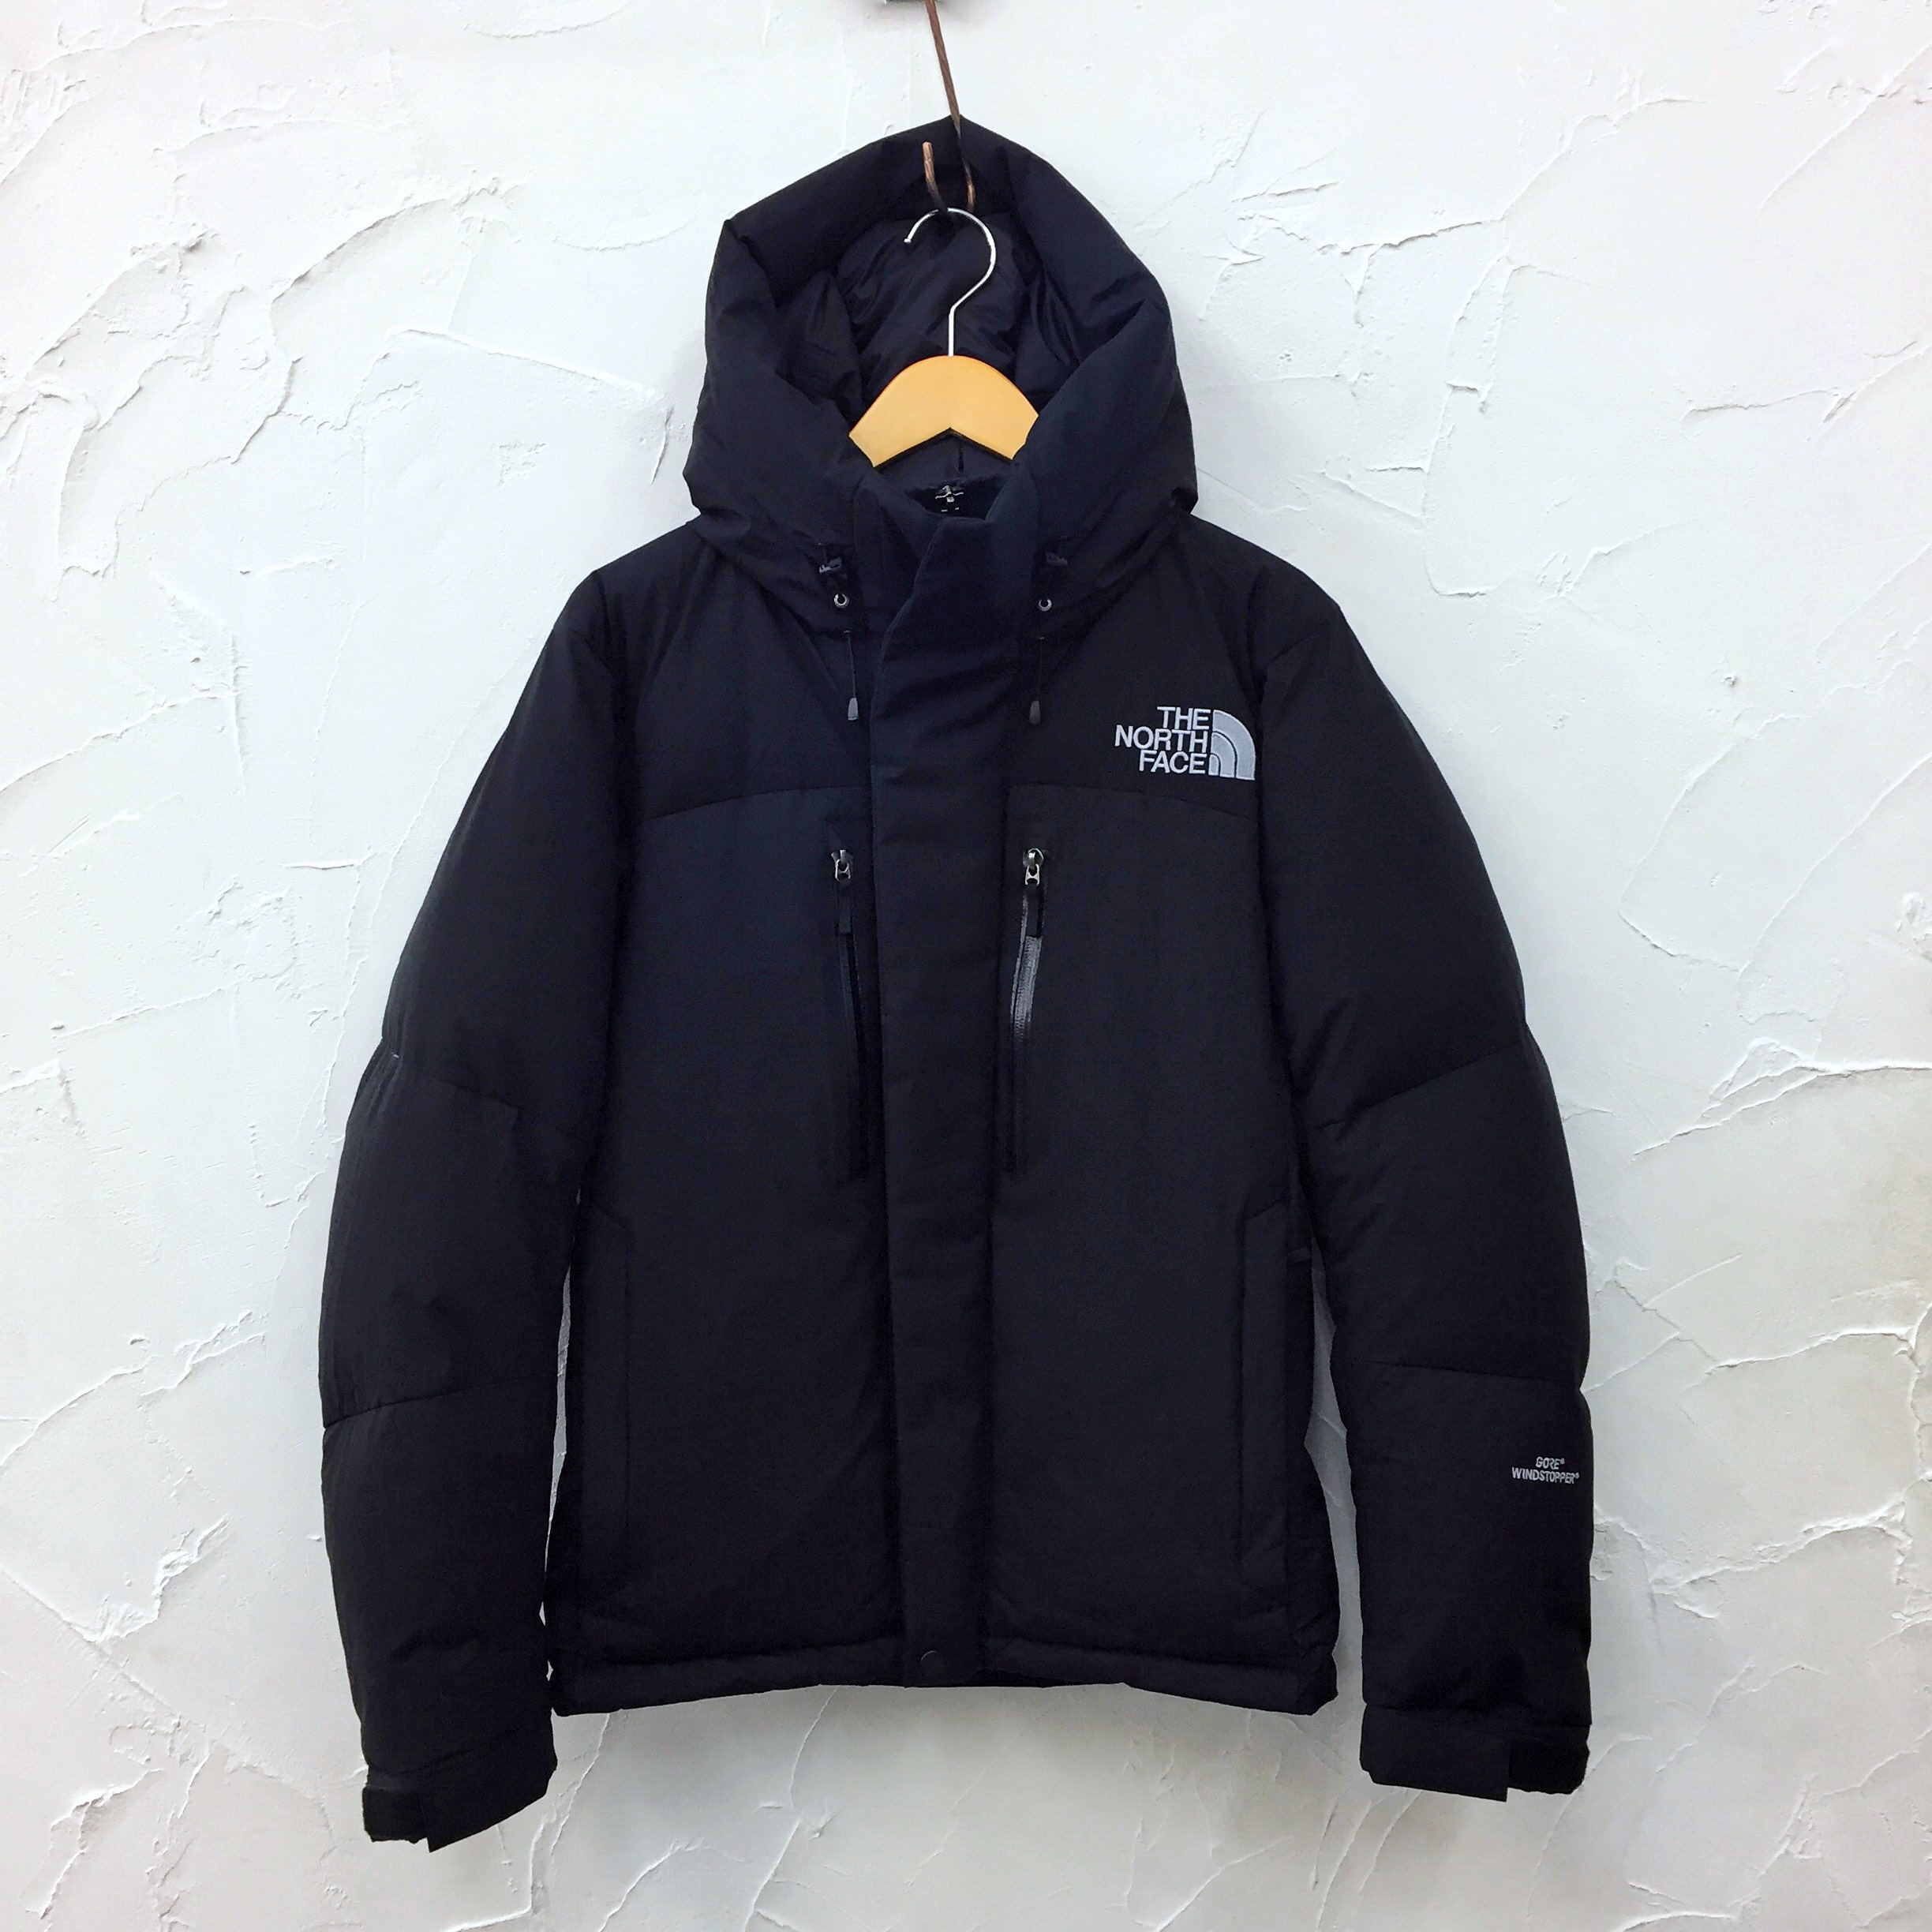 【NEW ARRIVAL】THE NORTH FACE BALTRO LIGHT JACKET入荷しました！！ | カインドオル（kindal